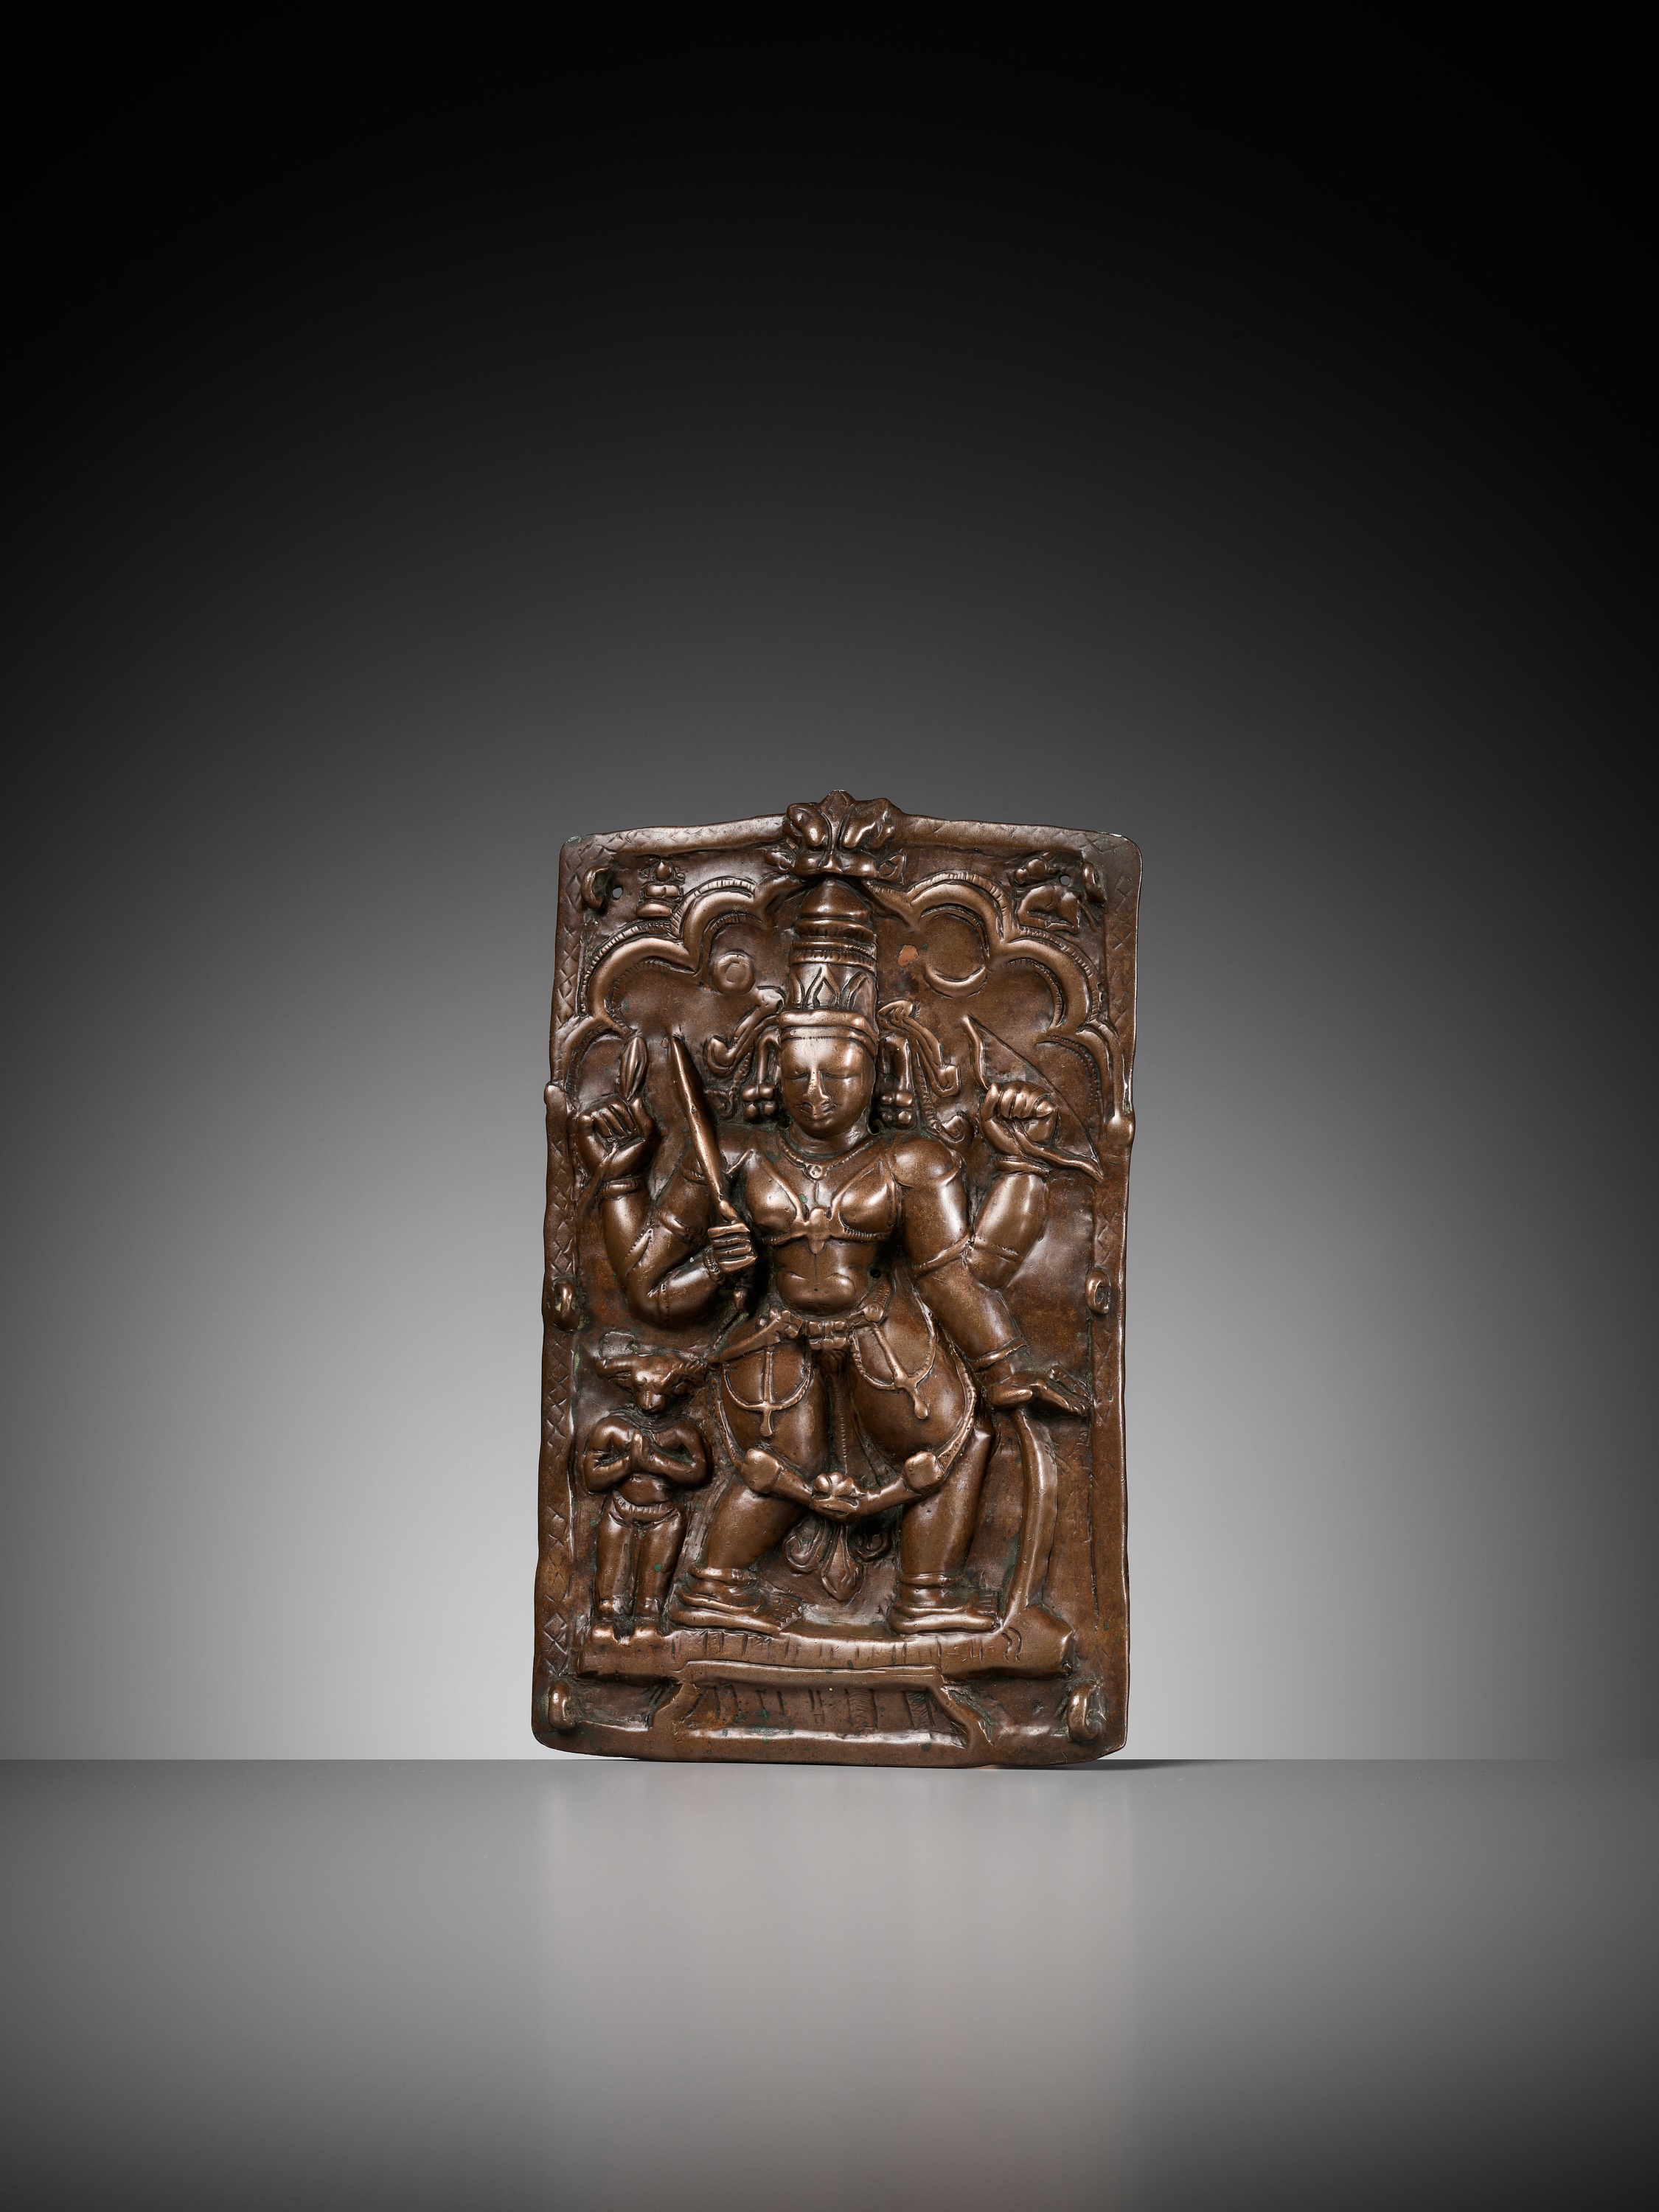 A CEREMONIAL COPPER SHIELD DEPICTING VIRABHADRA, 17TH-18TH CENTURY - Image 3 of 9